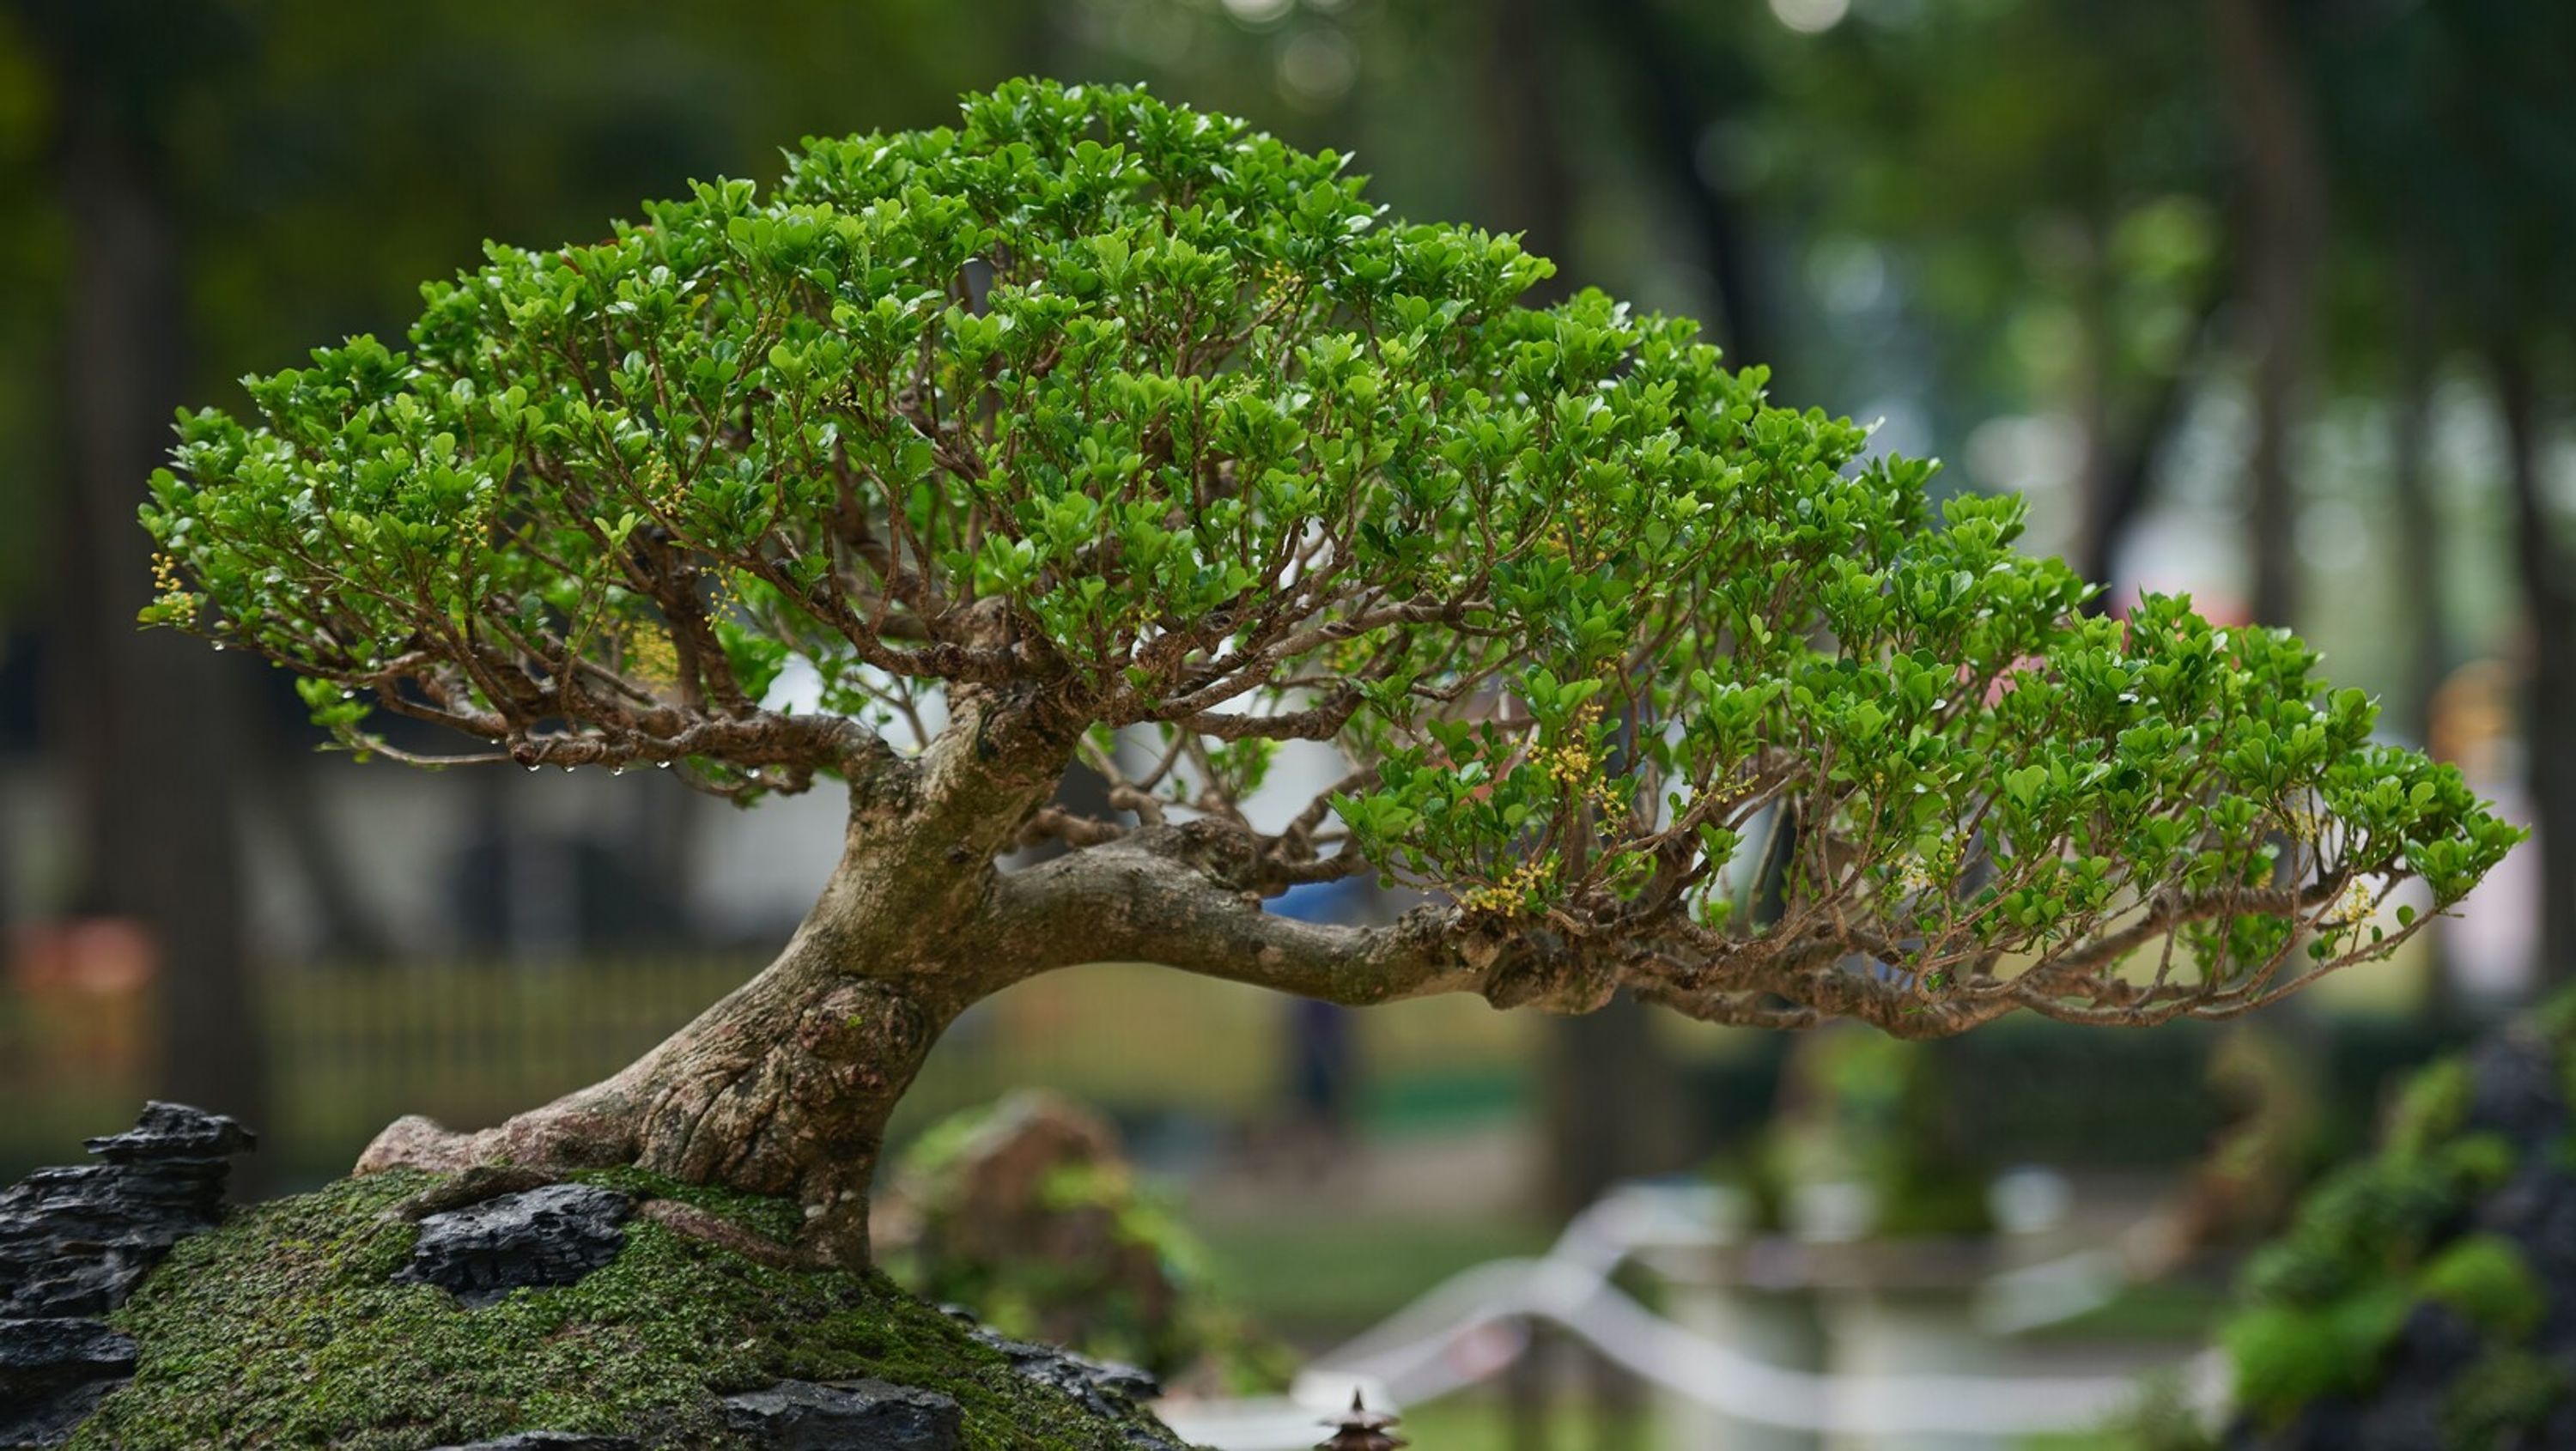 Discover the Art of Bonsai: How to Grow and Care for Miniature Trees